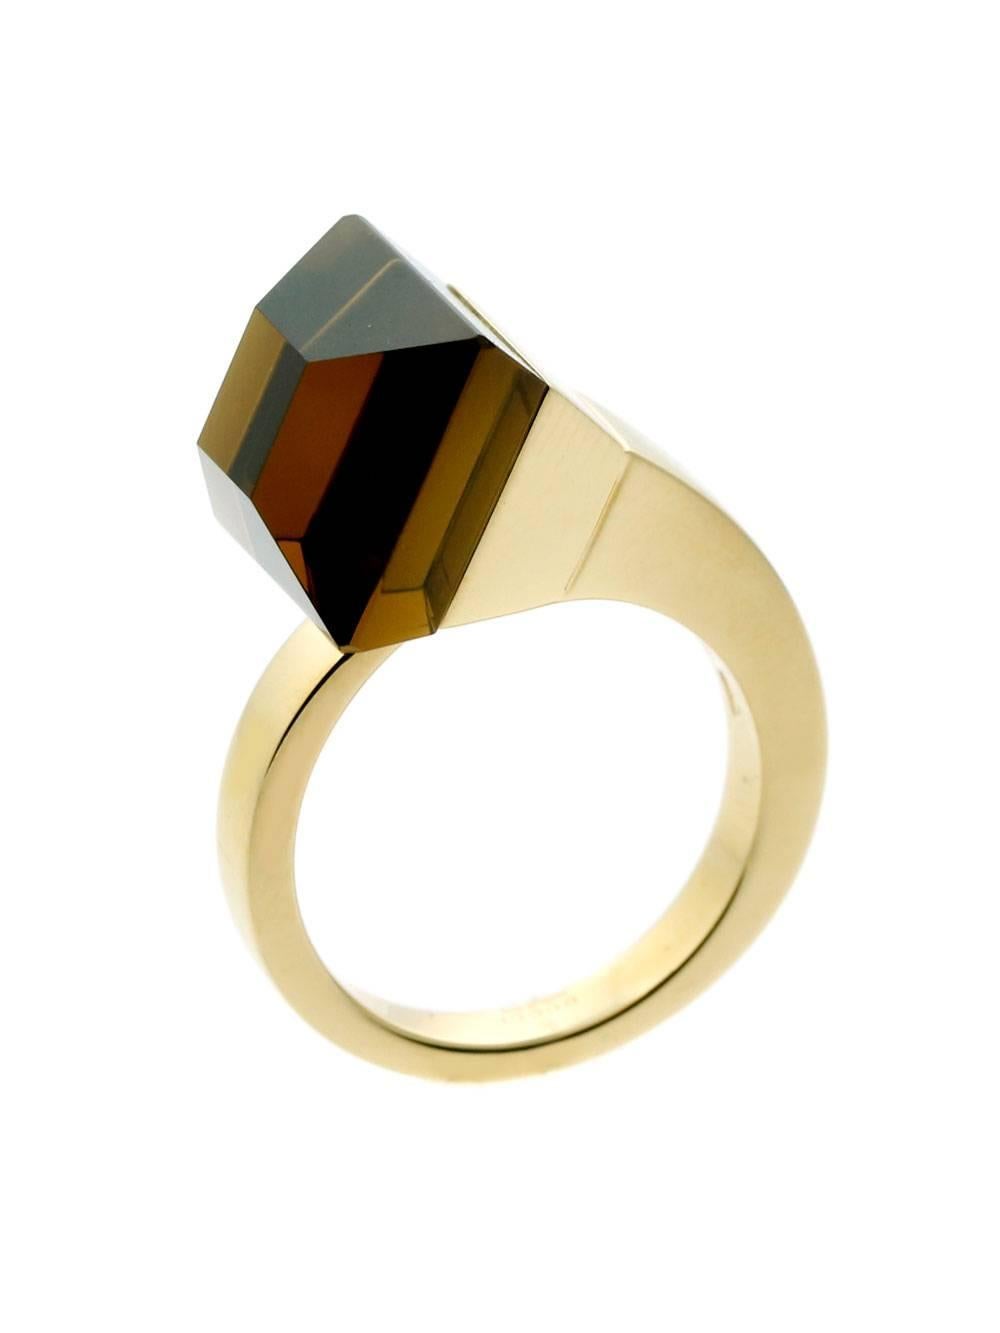 A fabulous Gucci gold ring set with a beautiful Smokey Quartz in 18k yellow gold. 

Size: US 7
Dimensions: 12mm wide (.47″ wide)

Inventory ID: 0000286